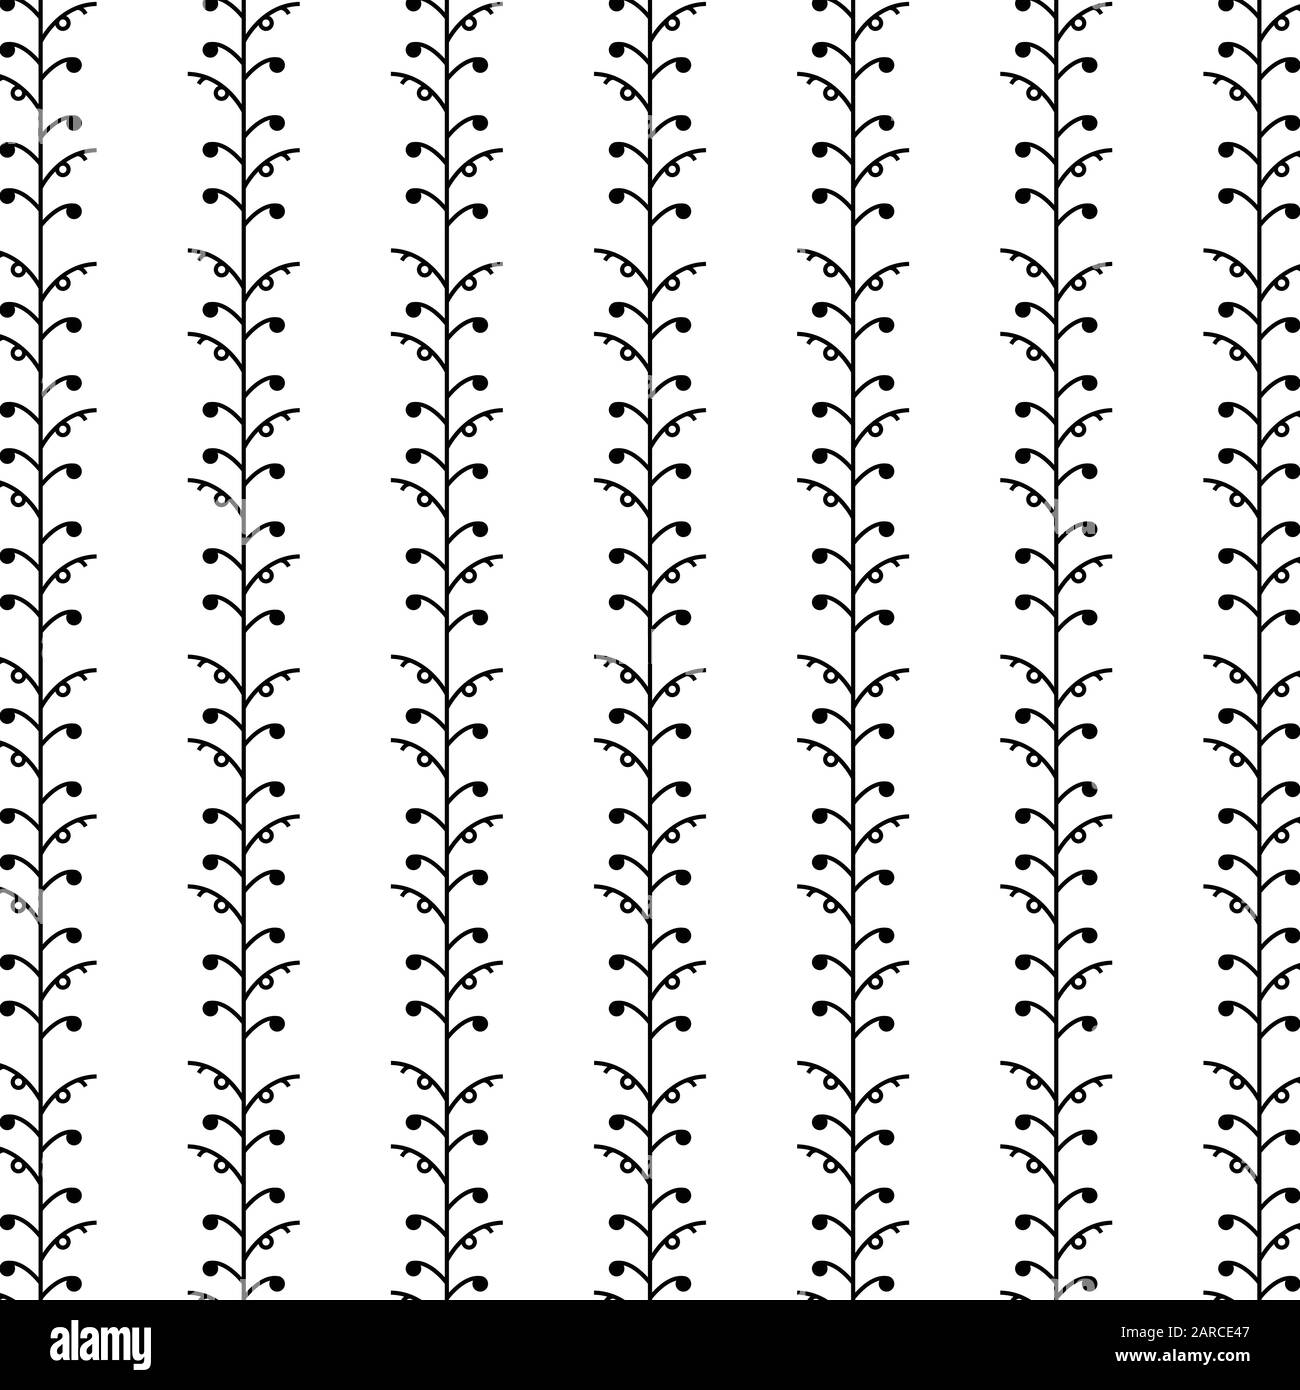 seamless flower patterns on a straight stems on a plain background. damask floral pattern. endless pattern can be used for printing, fabric, paper etc Stock Vector